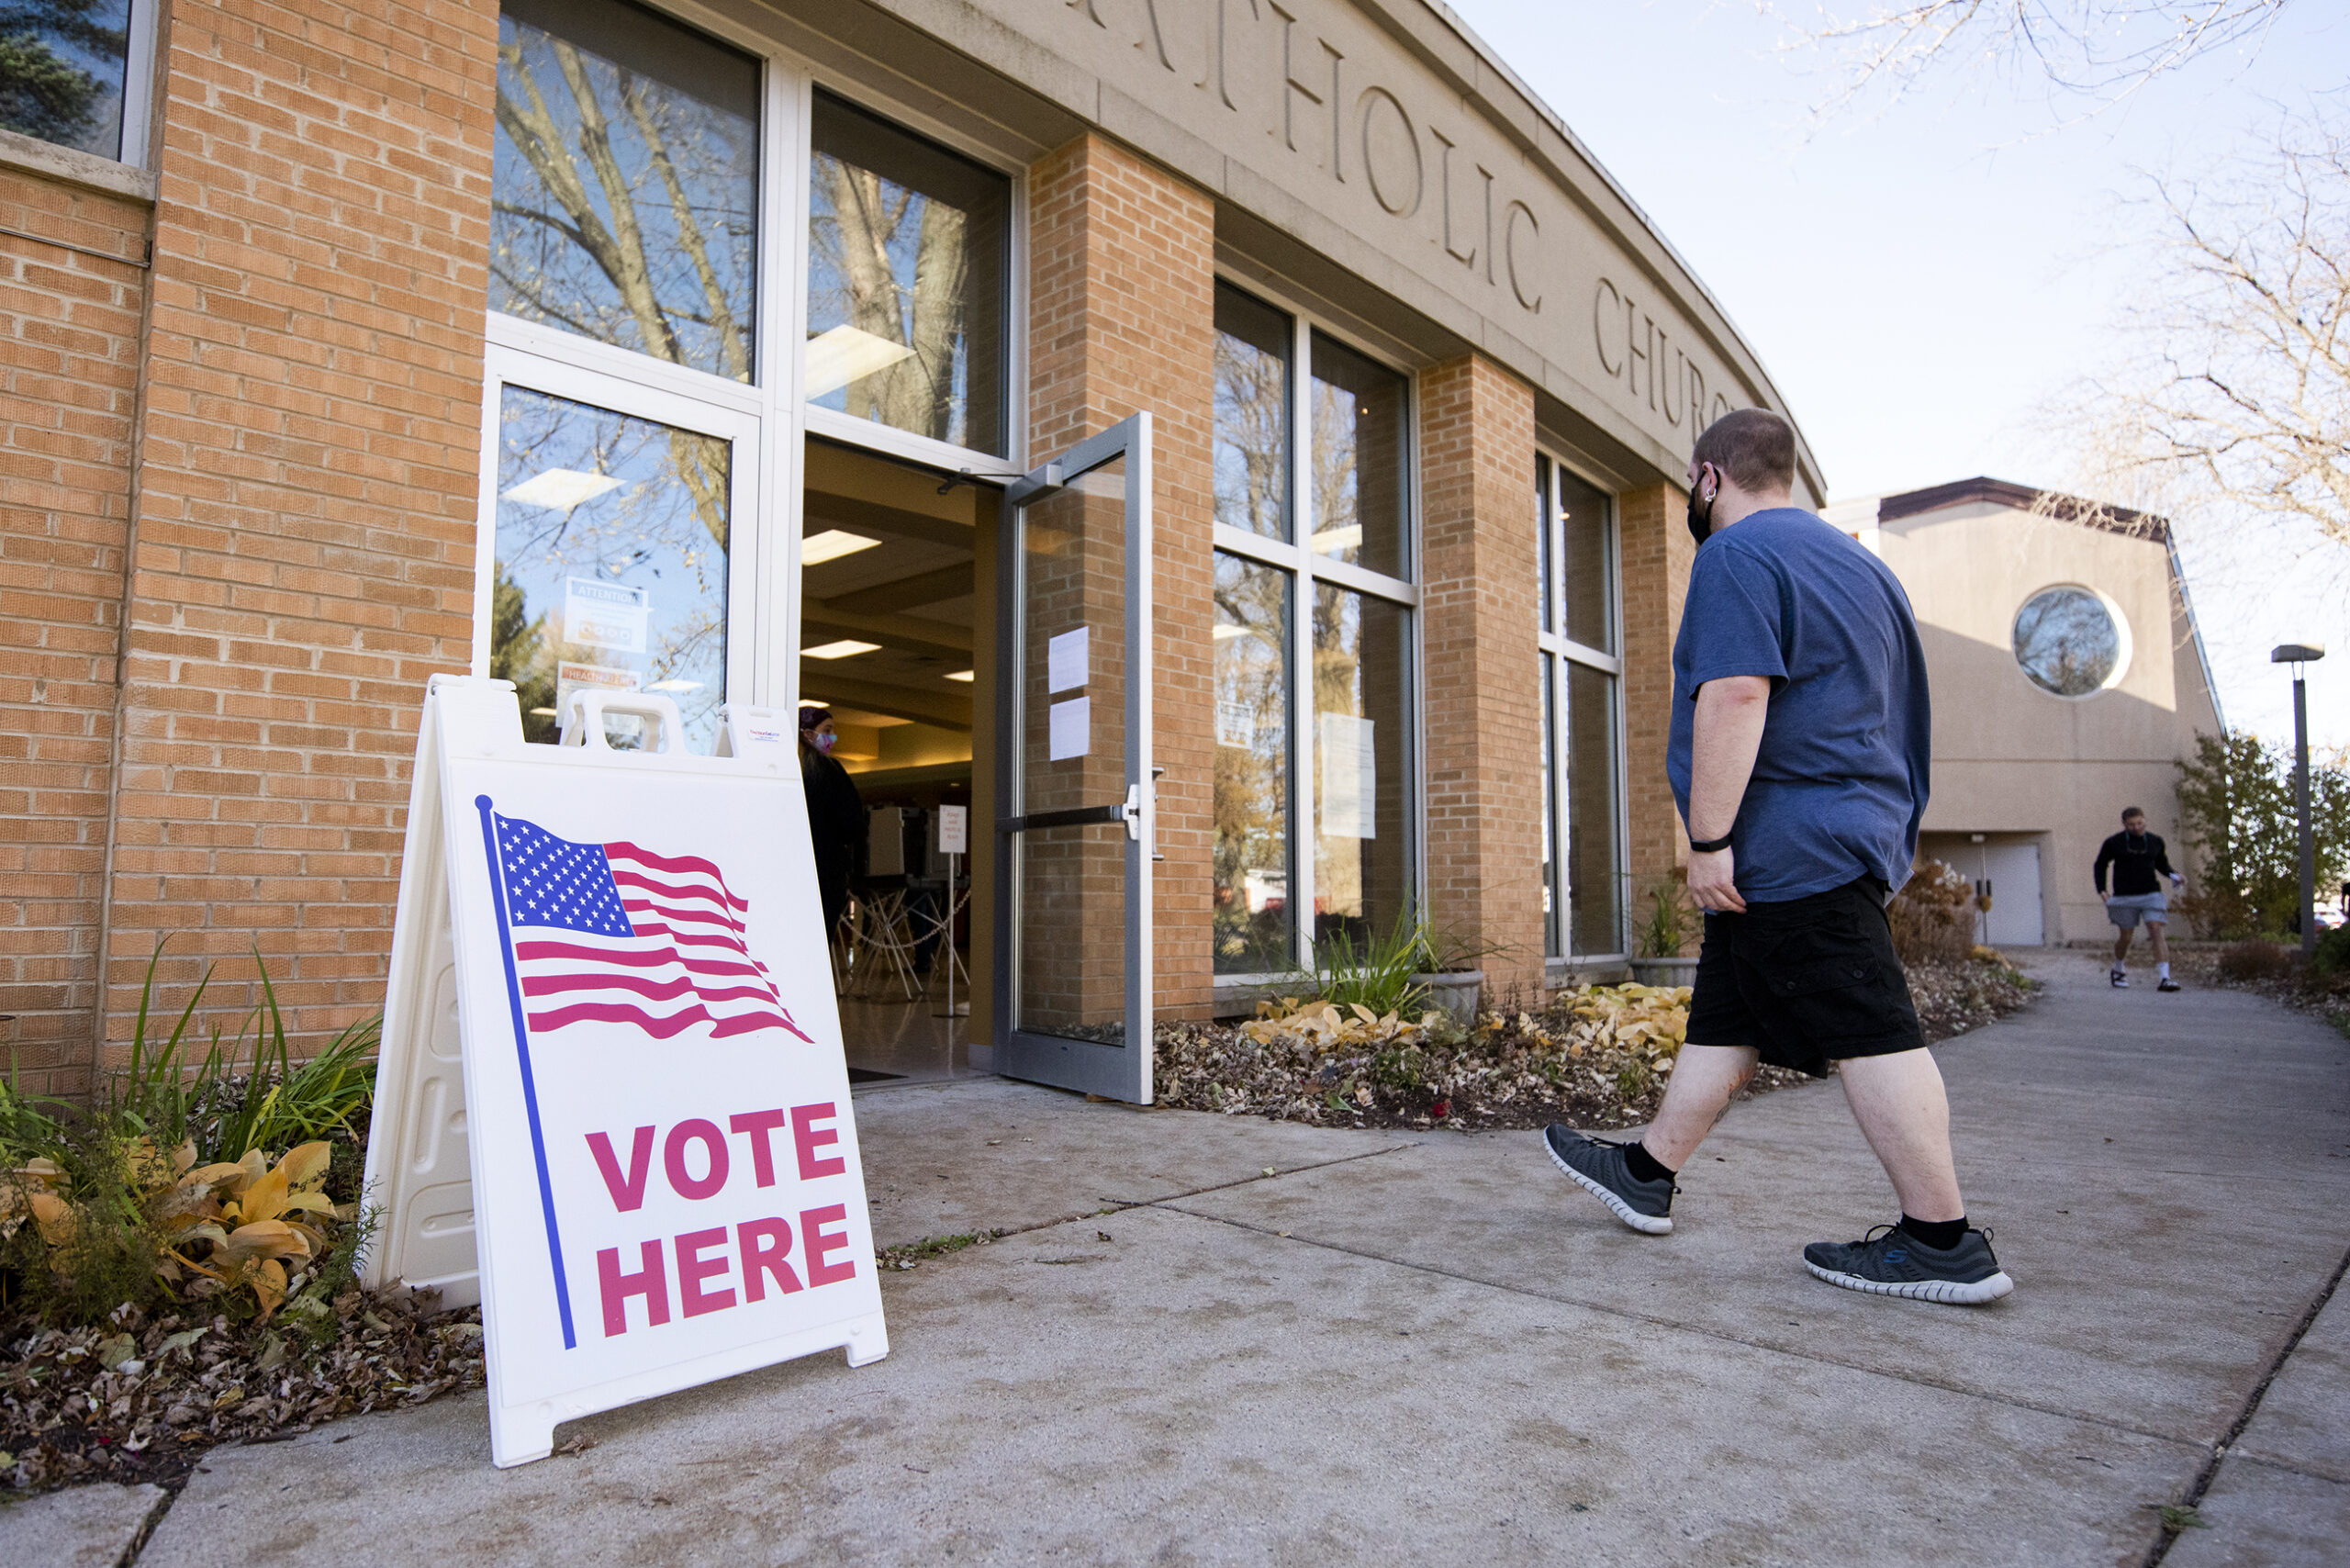 a voter walks into a polling location. a sign says "vote here."